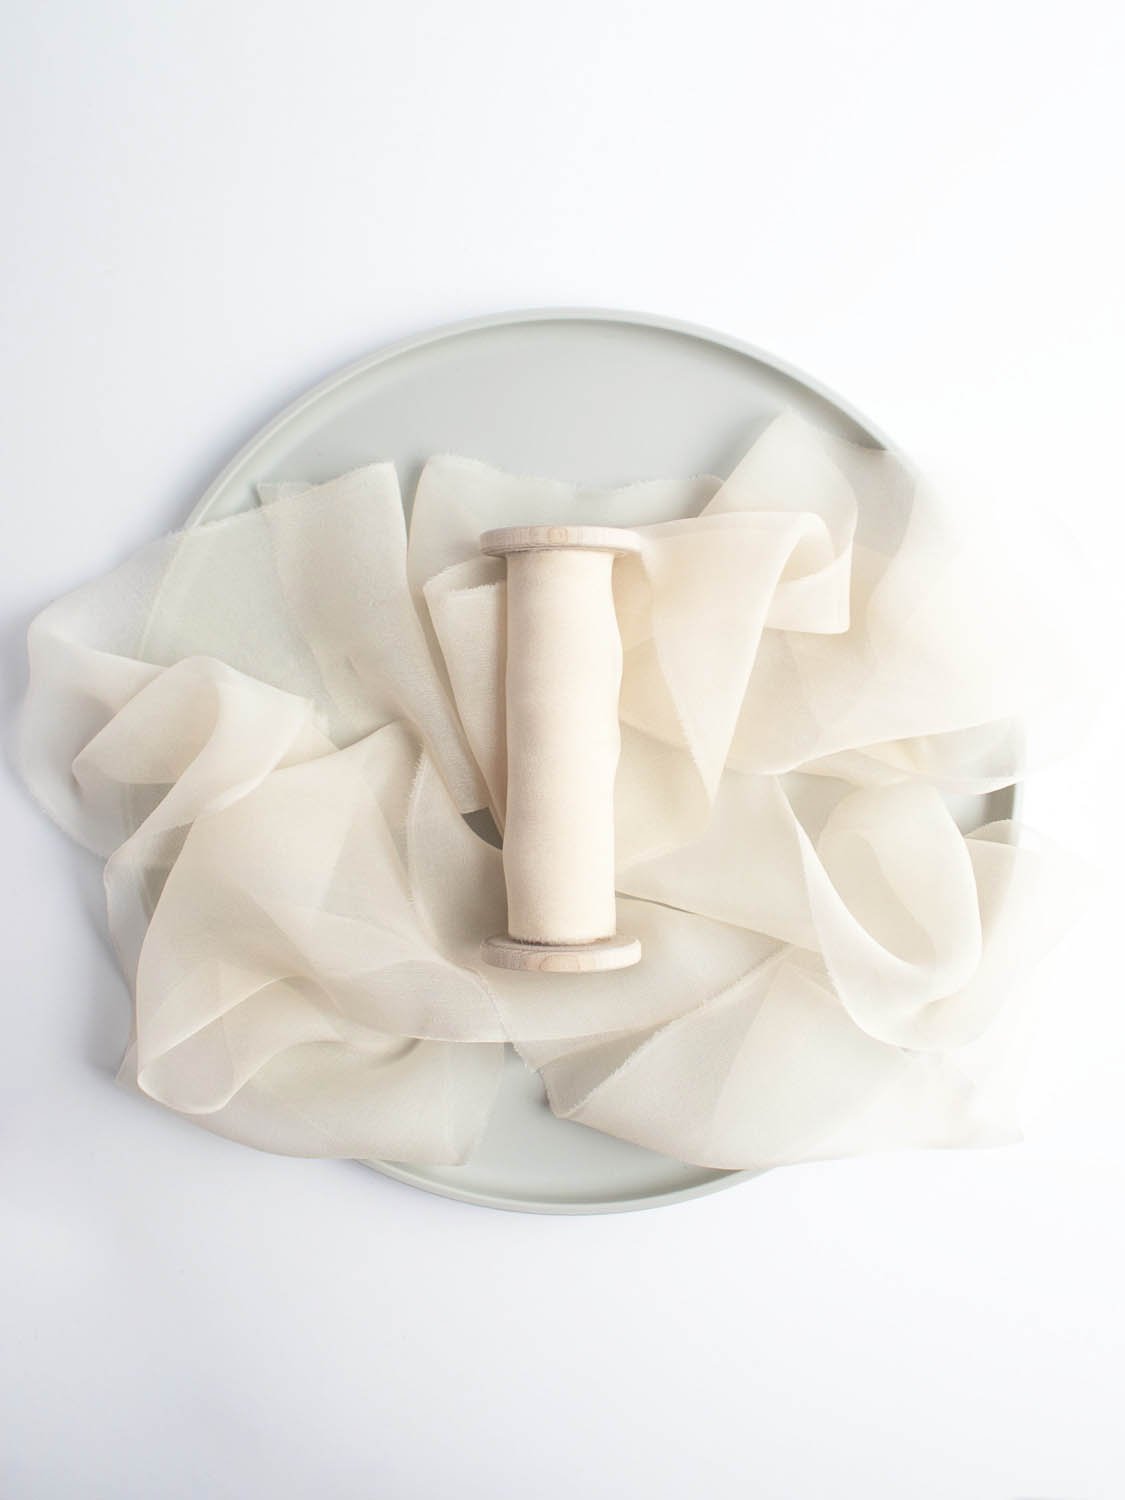 Antiqued White Silk Ribbon - Gauze, Naturally Dyed - The Lesser Bear